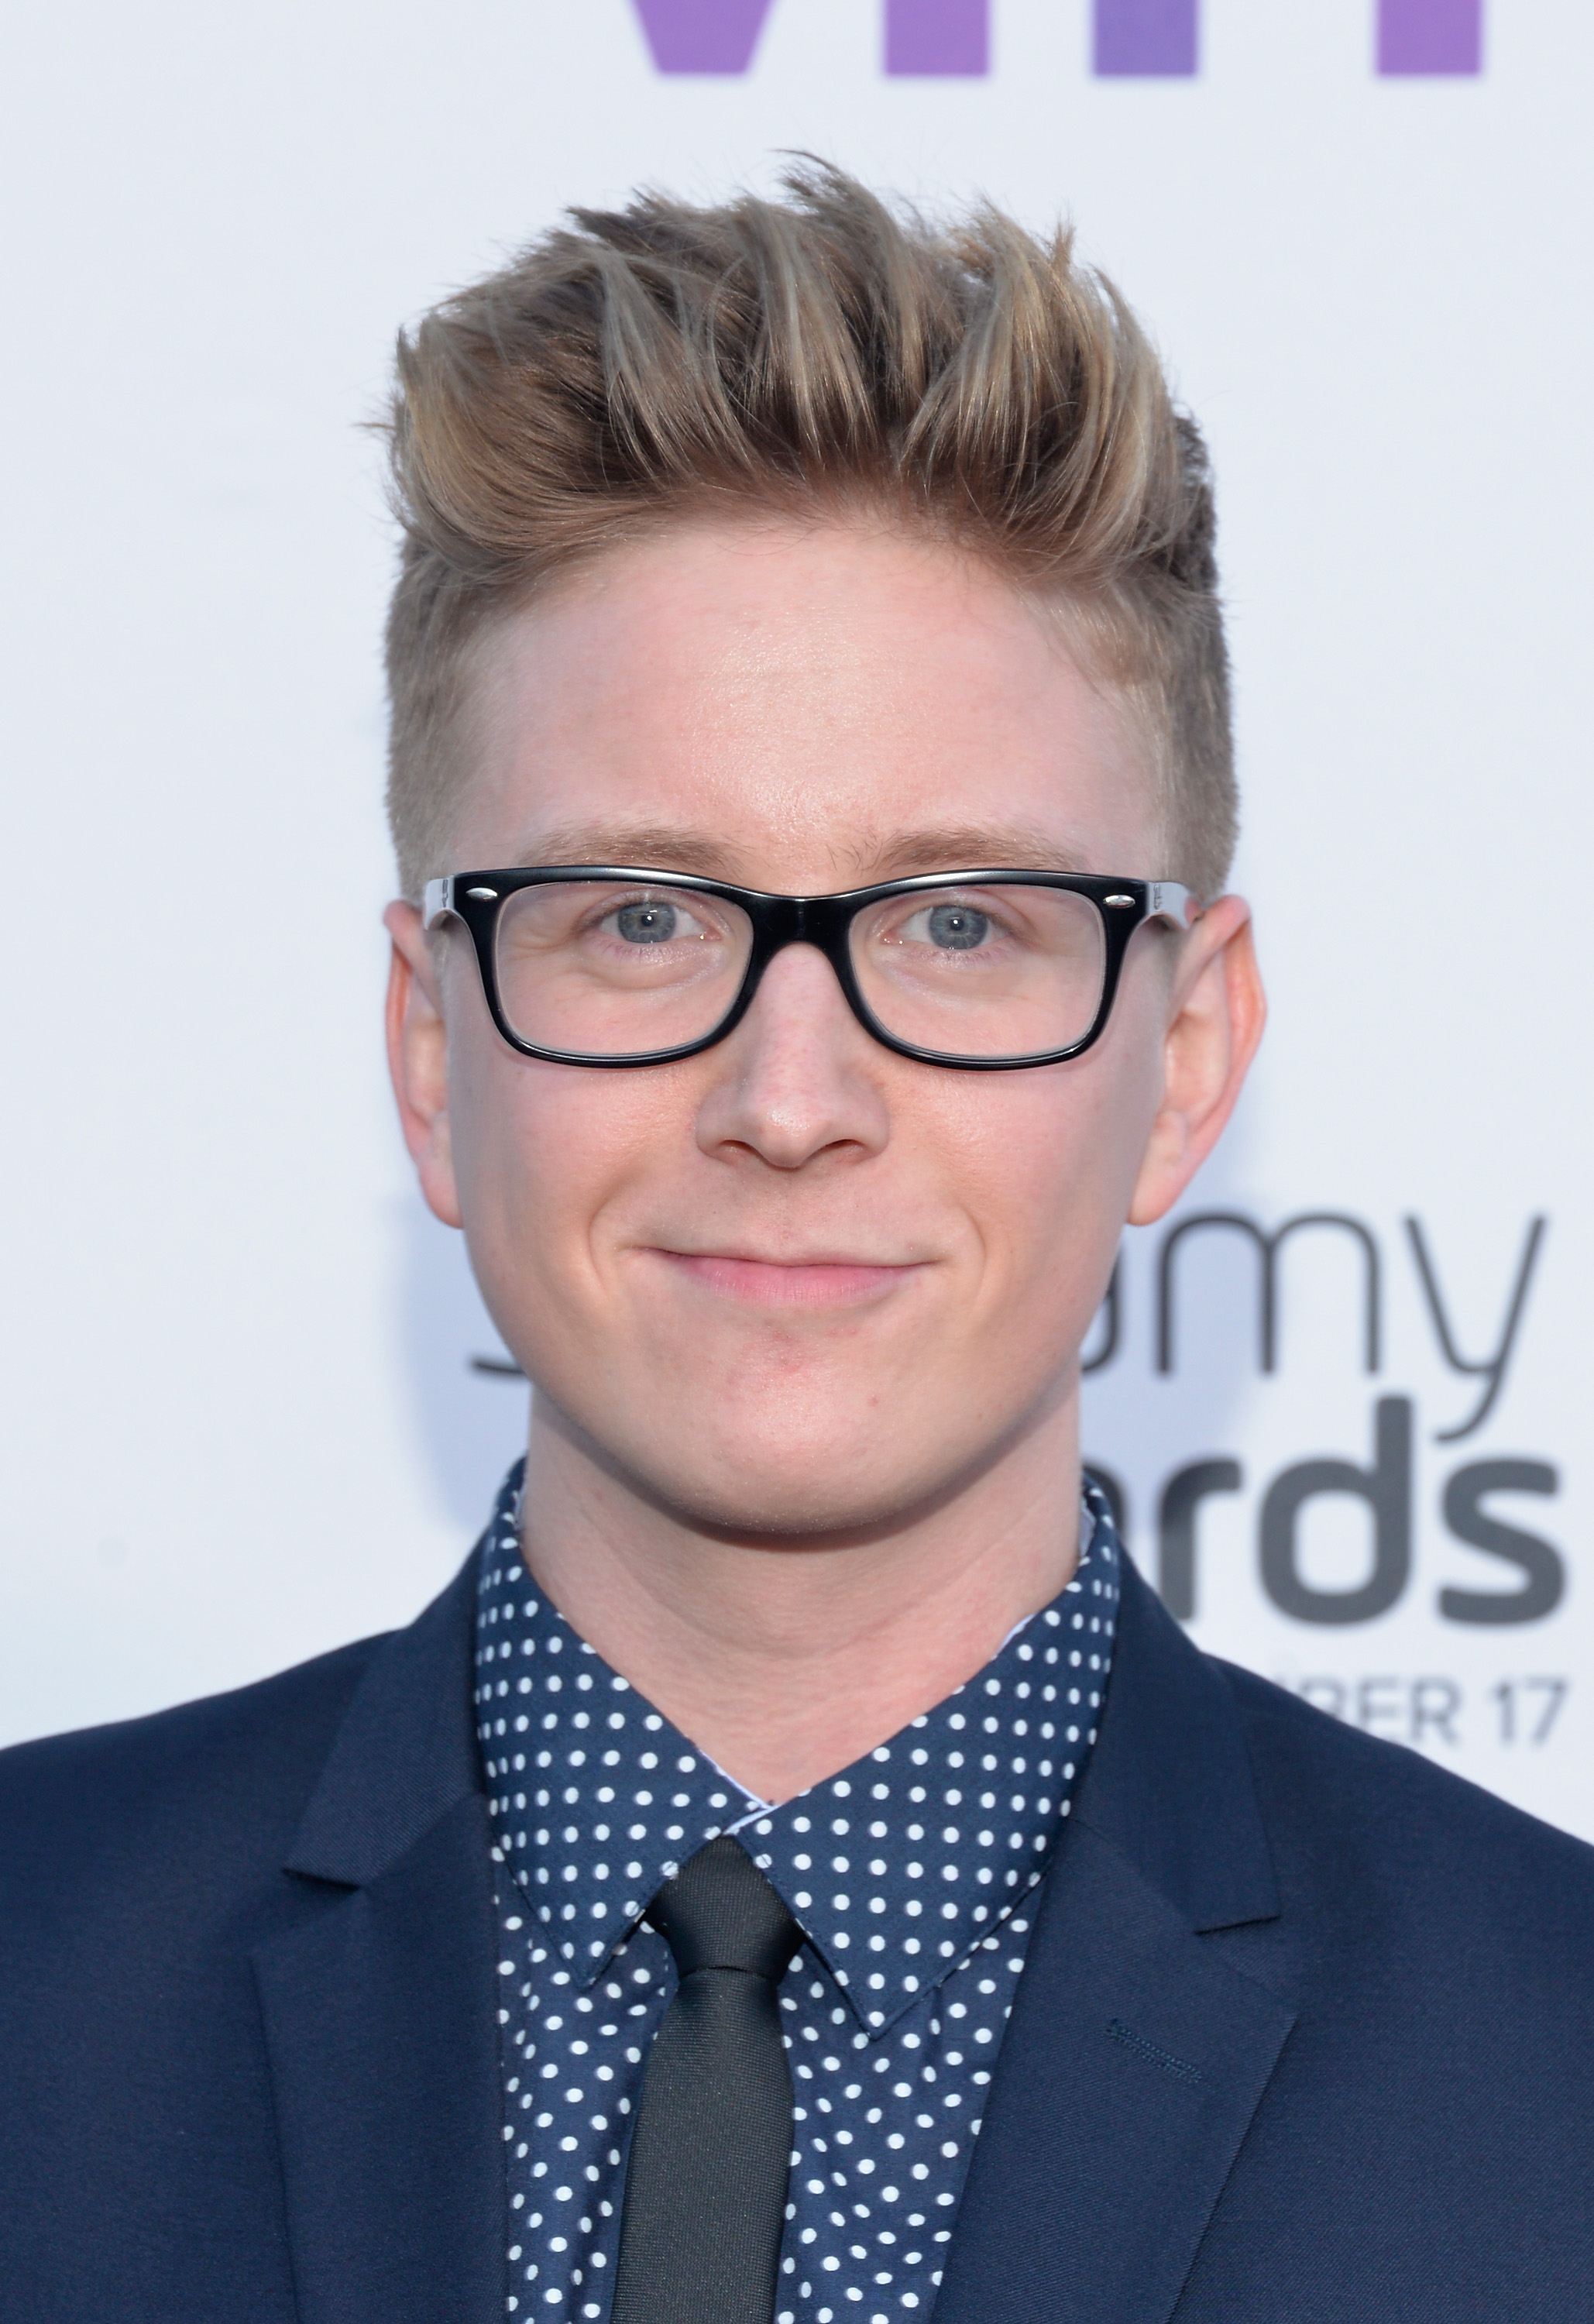 Internet personality Tyler Oakley attends the 5th Annual Streamy Awards at Hollywood Palladium in Los Angeles, on Sept. 17, 2015. (Michael Tullberg—Getty Images)